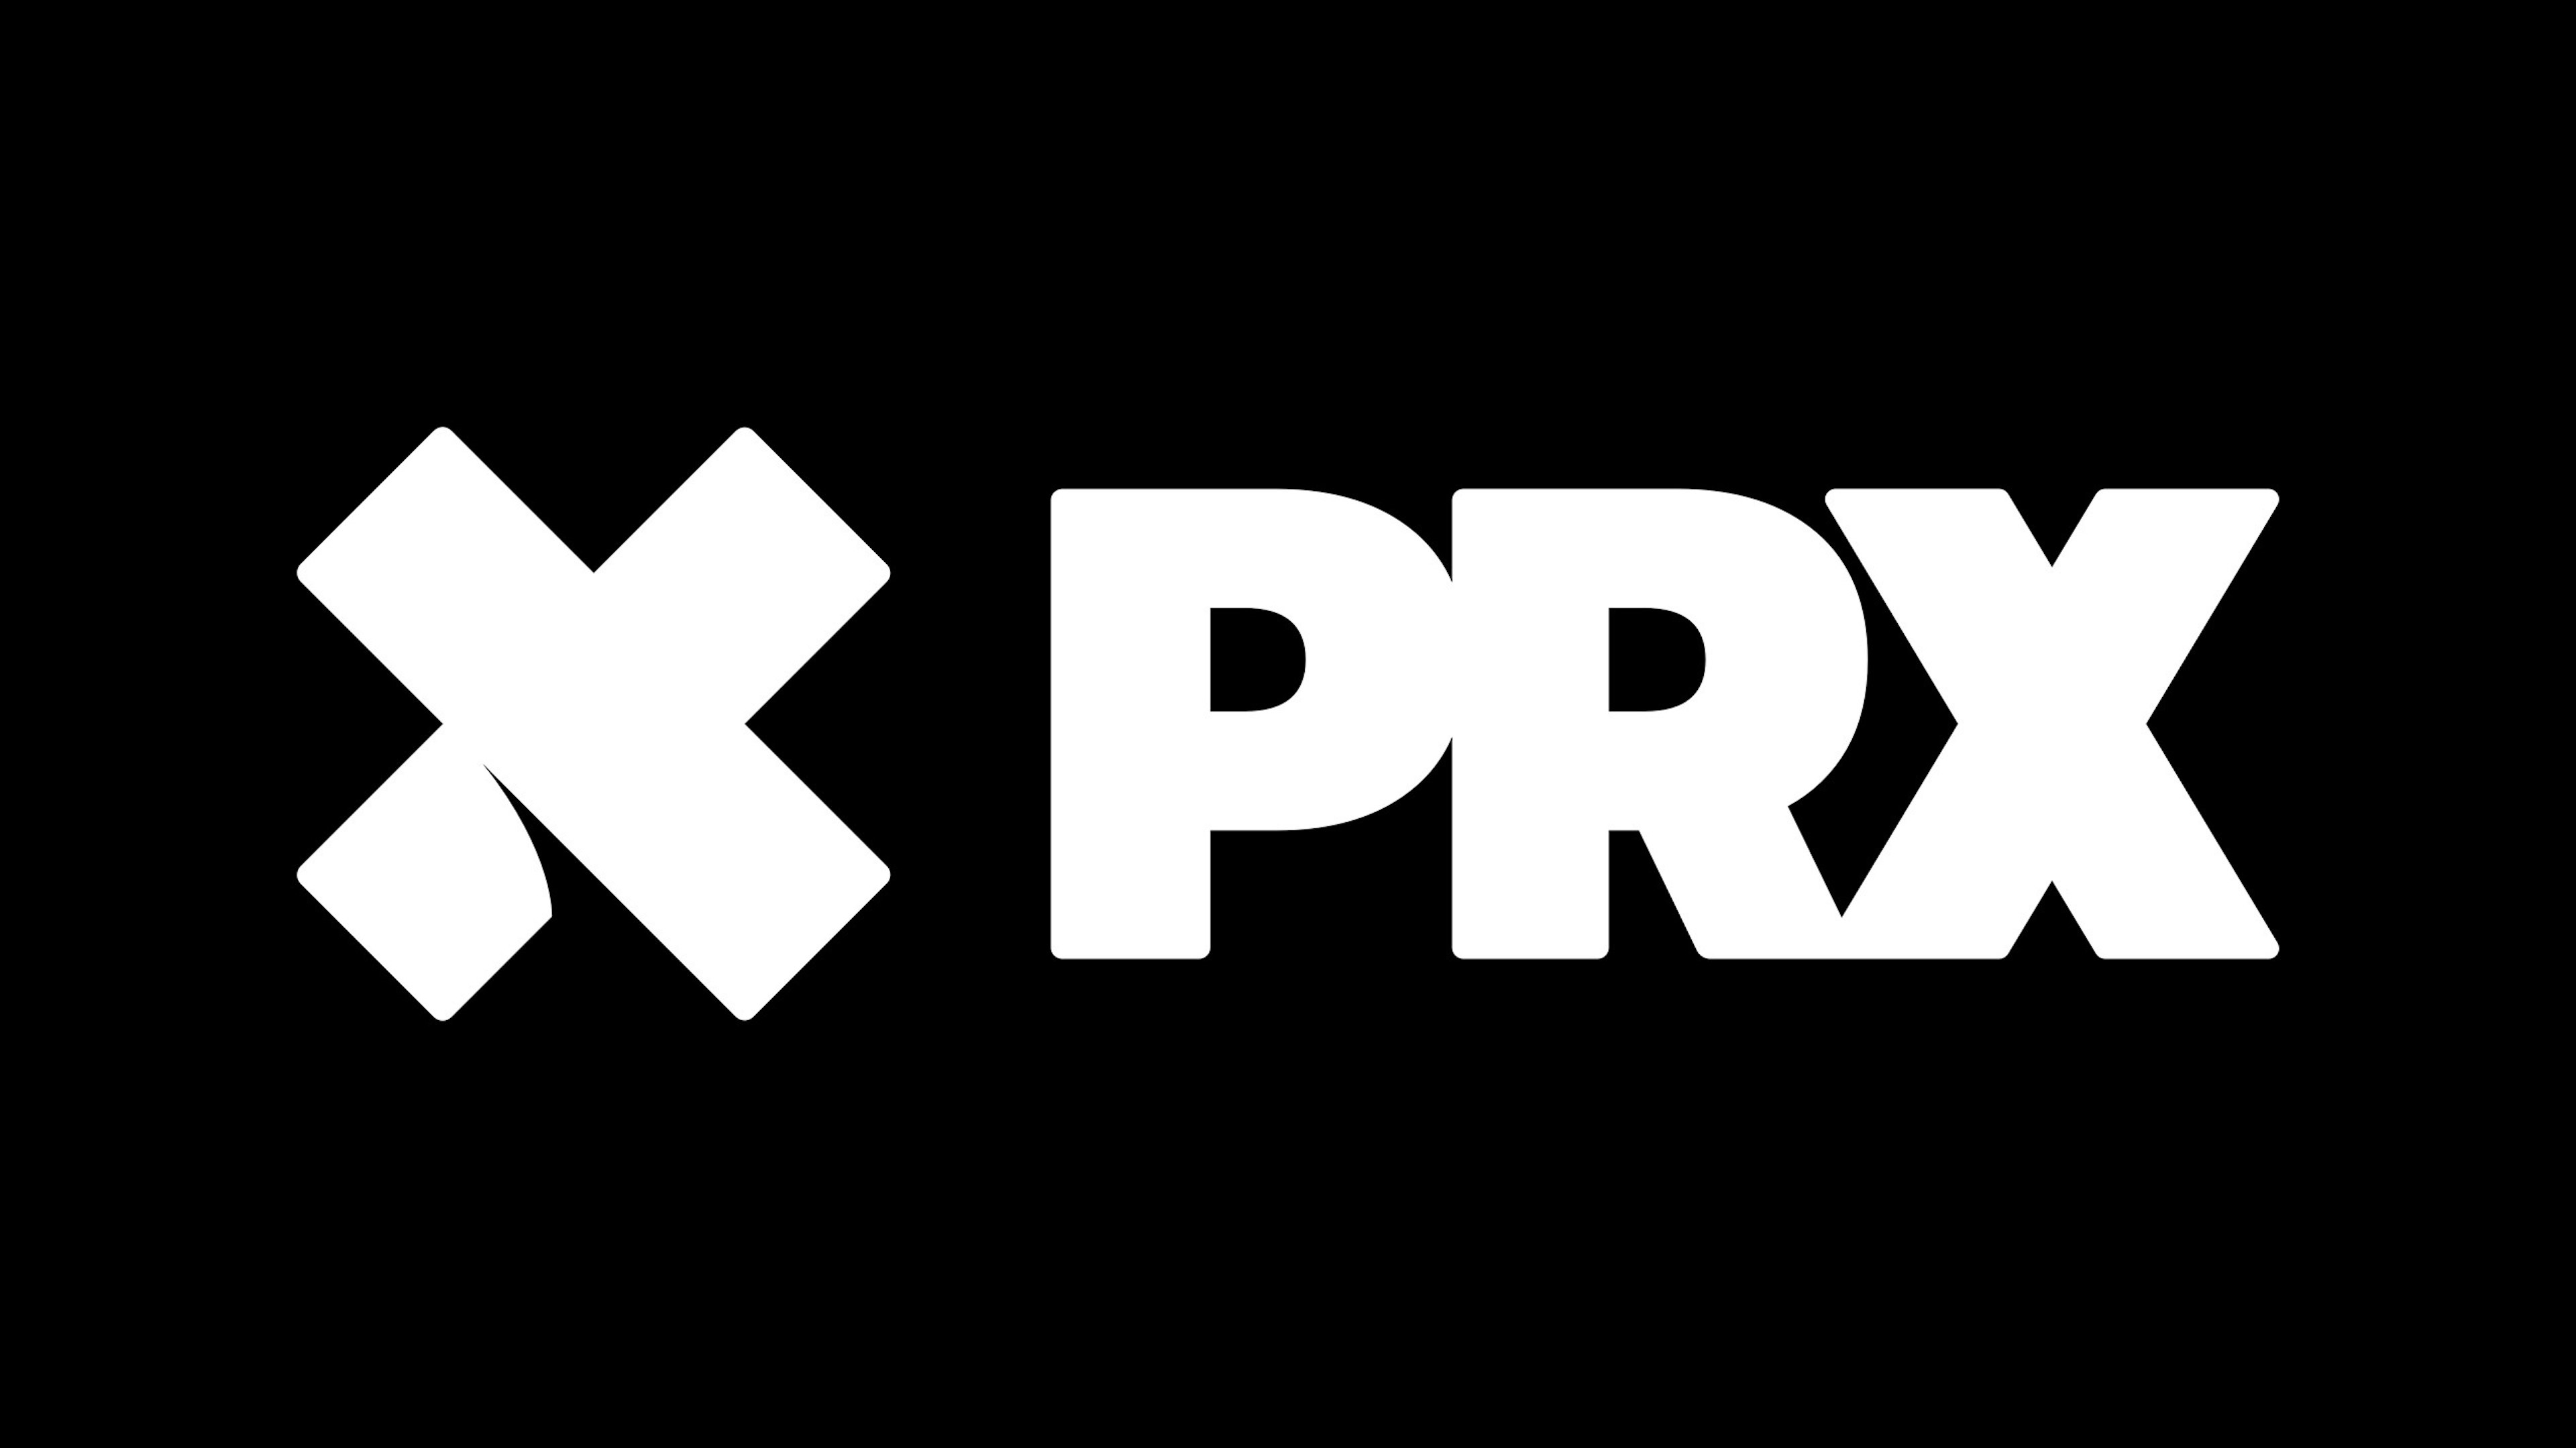 Black background with "X PRX" written in white